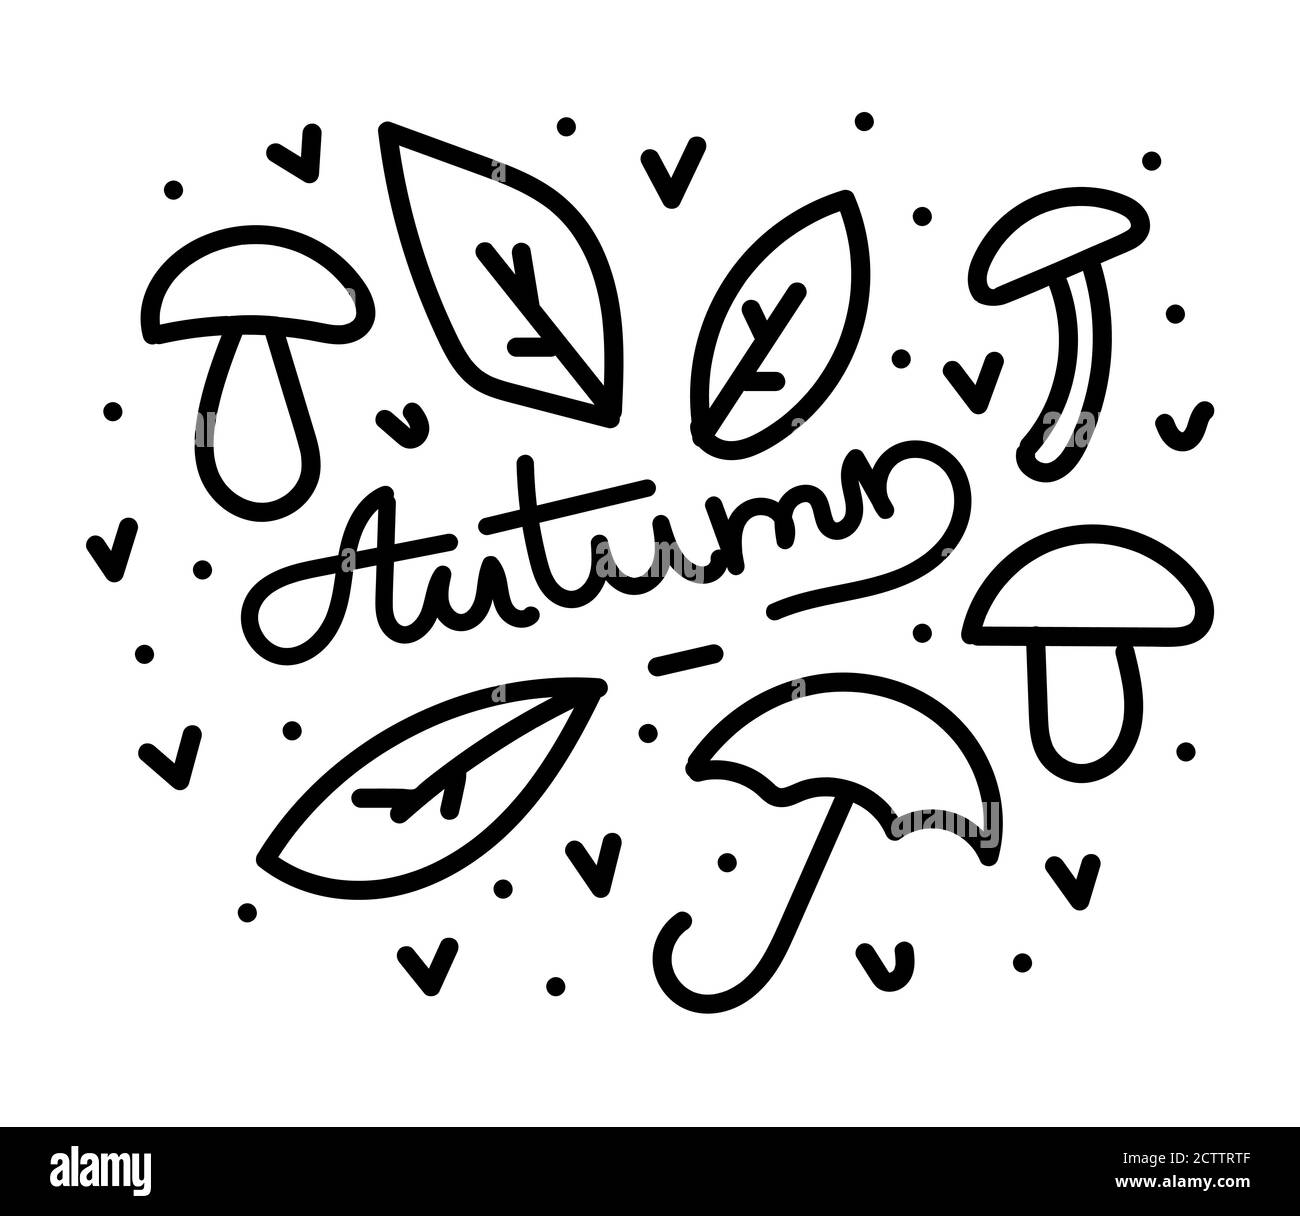 Hand drawn autumn doodle. Hand written lettering Autumn and some fallen leaves and mushrooms are around. Thick black stroke. Vectot illustration Stock Vector